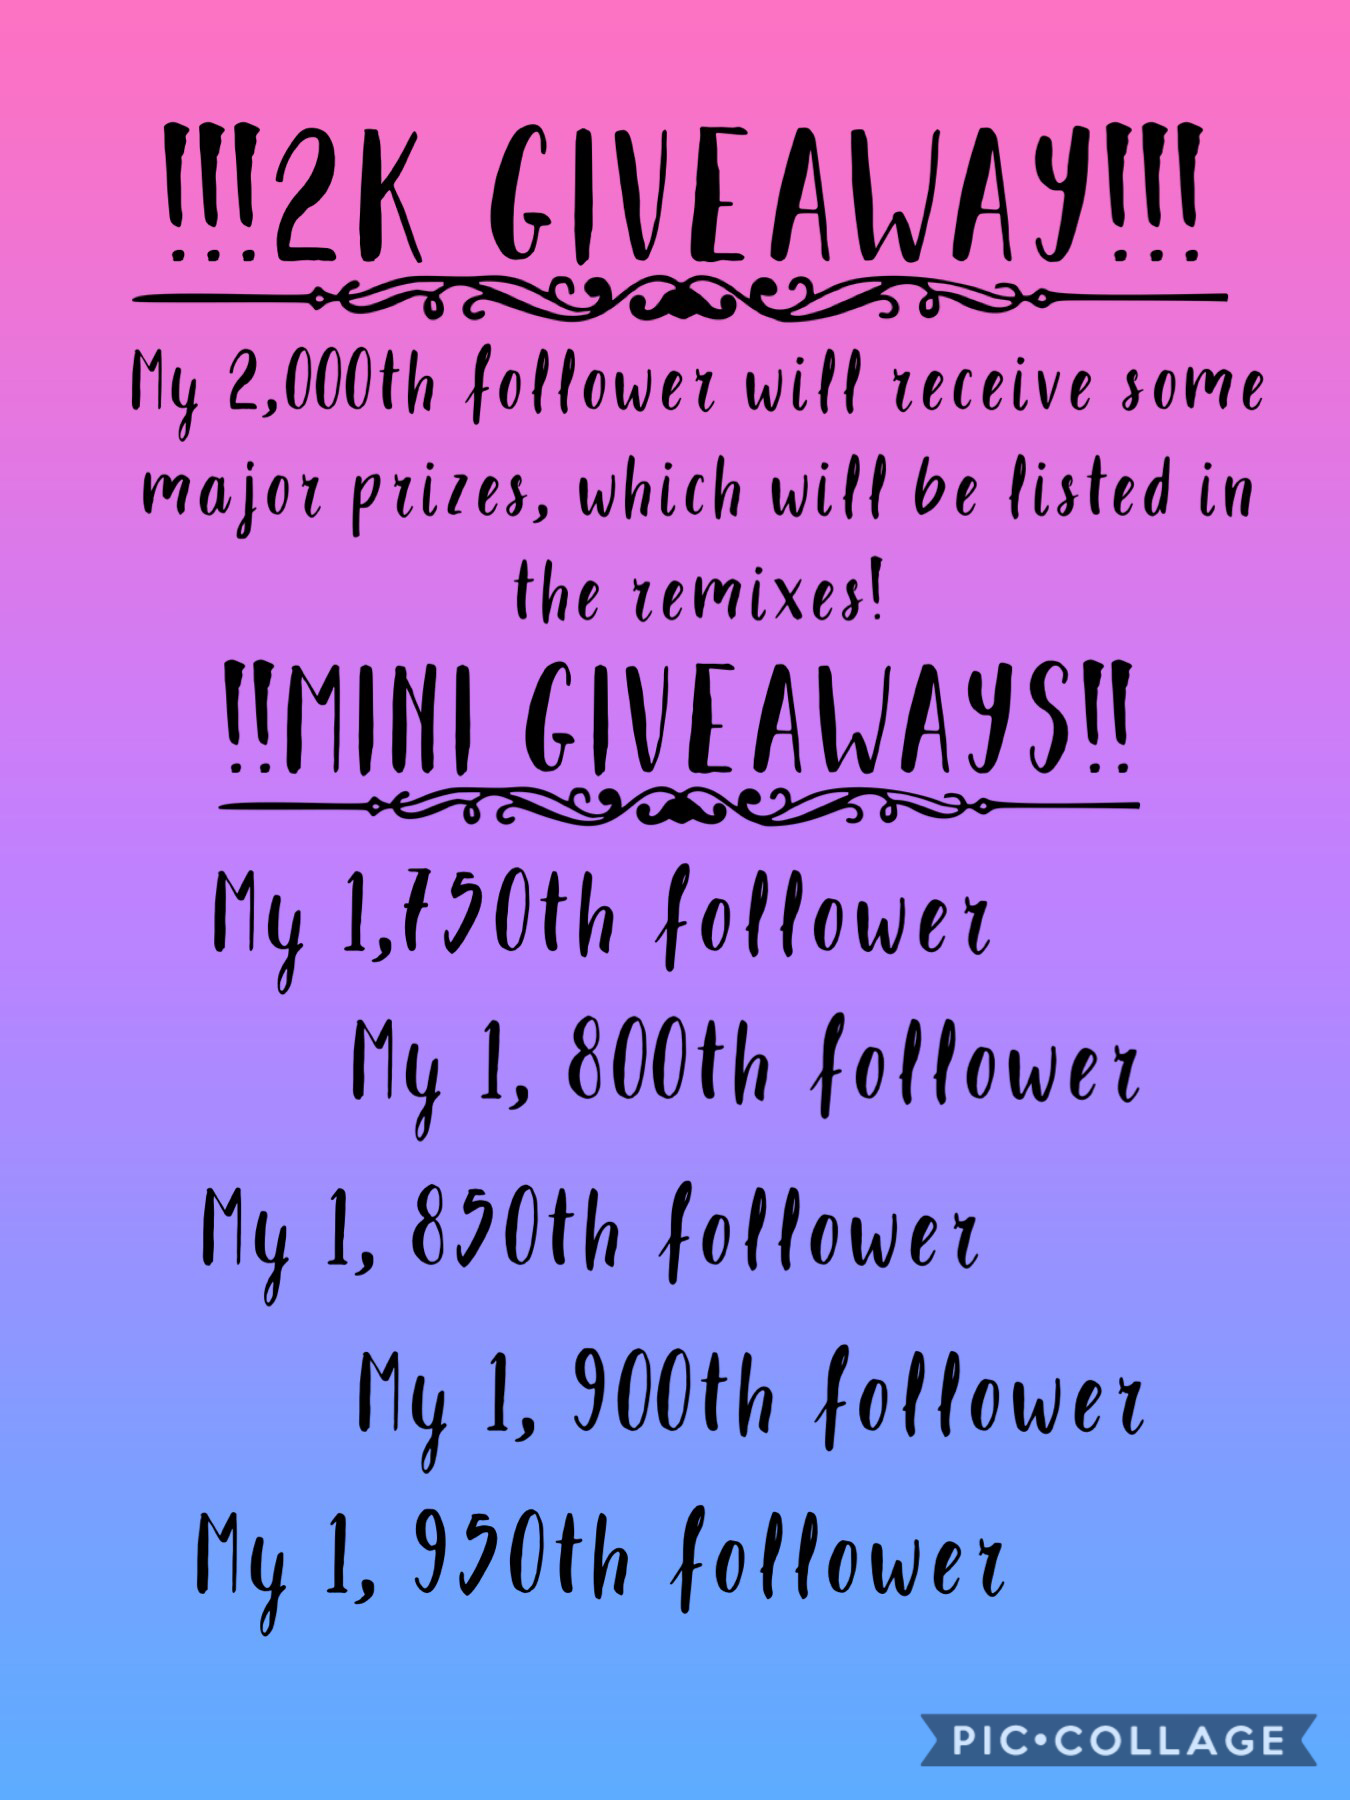 I know I’m not really close to 2K yet, but I thought that some mini giveaways would be fun!